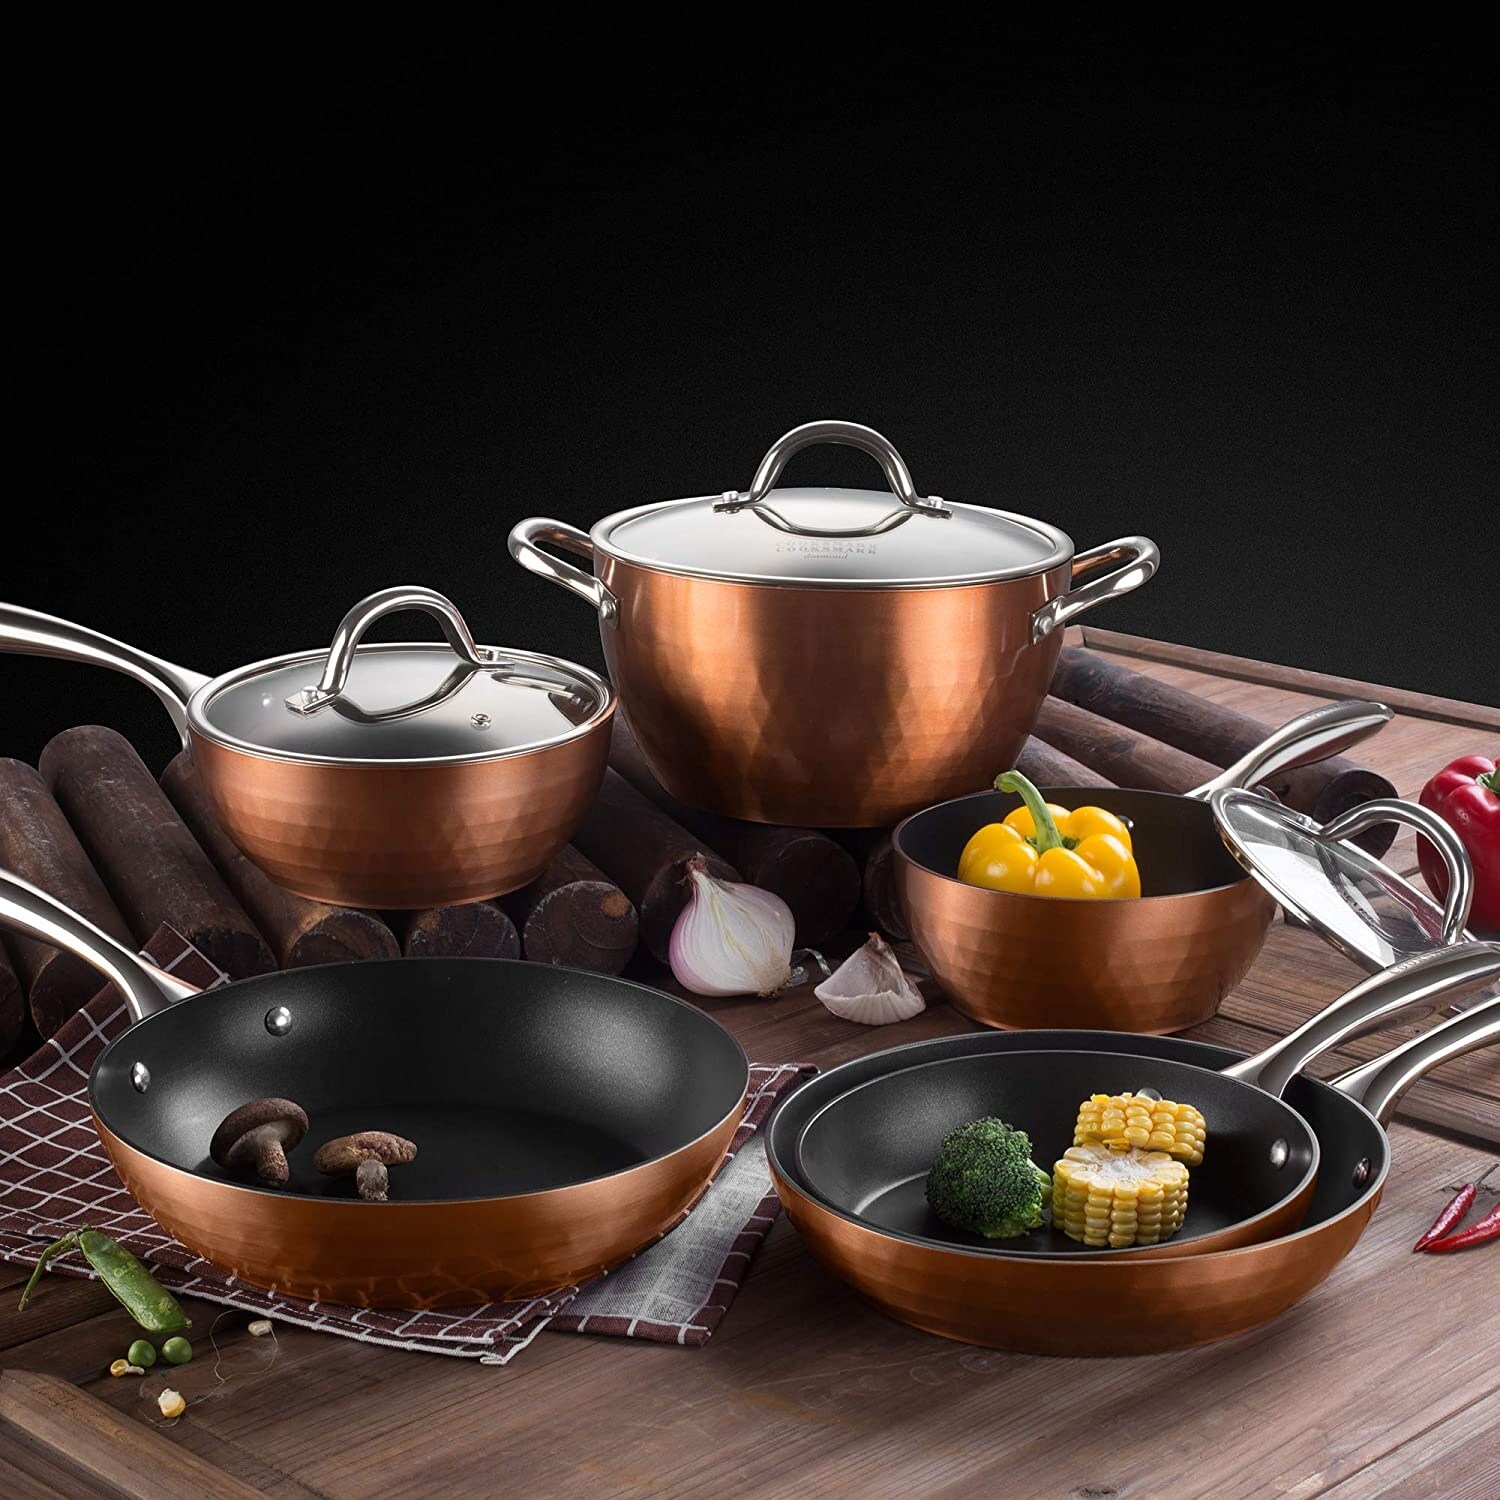 https://ak1.ostkcdn.com/images/products/is/images/direct/c19654db7b81f30db749e0a2af39fa8388fa4f7e/10-Piece-Pans-and-Pots-Set%2C-Diamond-Infused-Induction-Cookware-Set---Set-of-Induction-Pan-and-Pot-with-Sturdy-Glass-Lids-and-Non.jpg